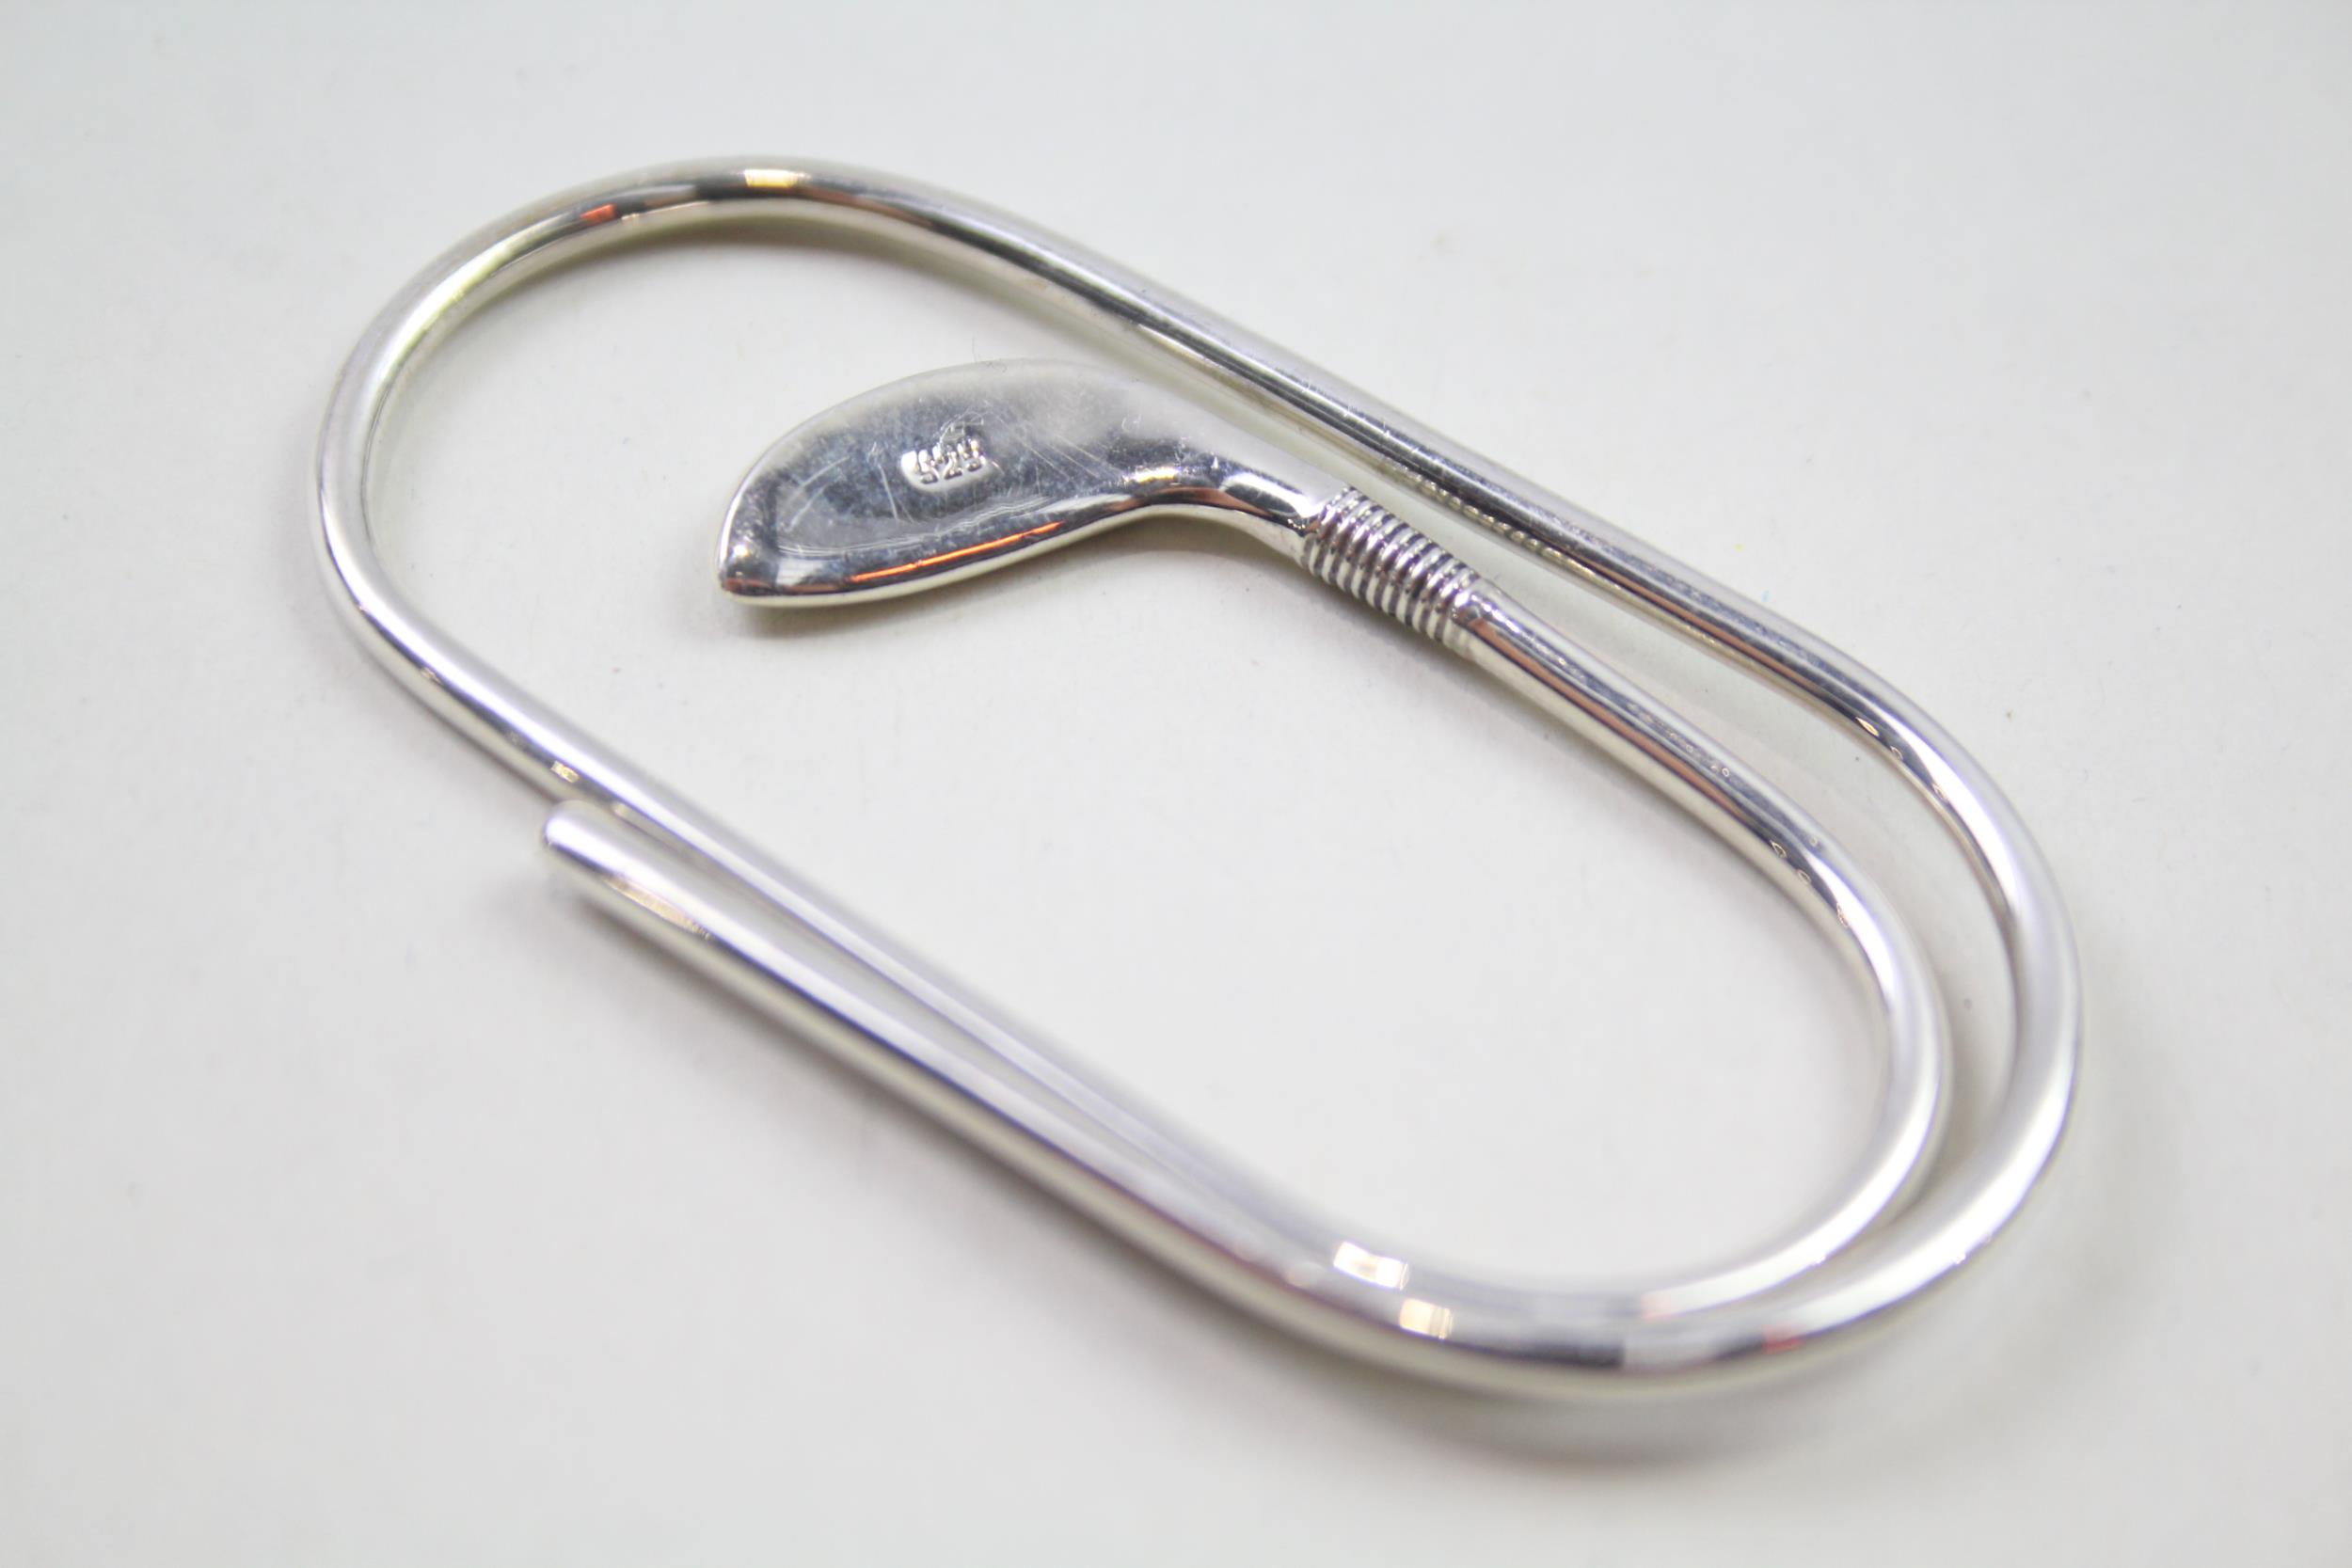 Vintage Stamped .925 Sterling Silver Novelty Golf Club Paperclip Bookmark (17g) // Length - 7cm In - Image 6 of 6